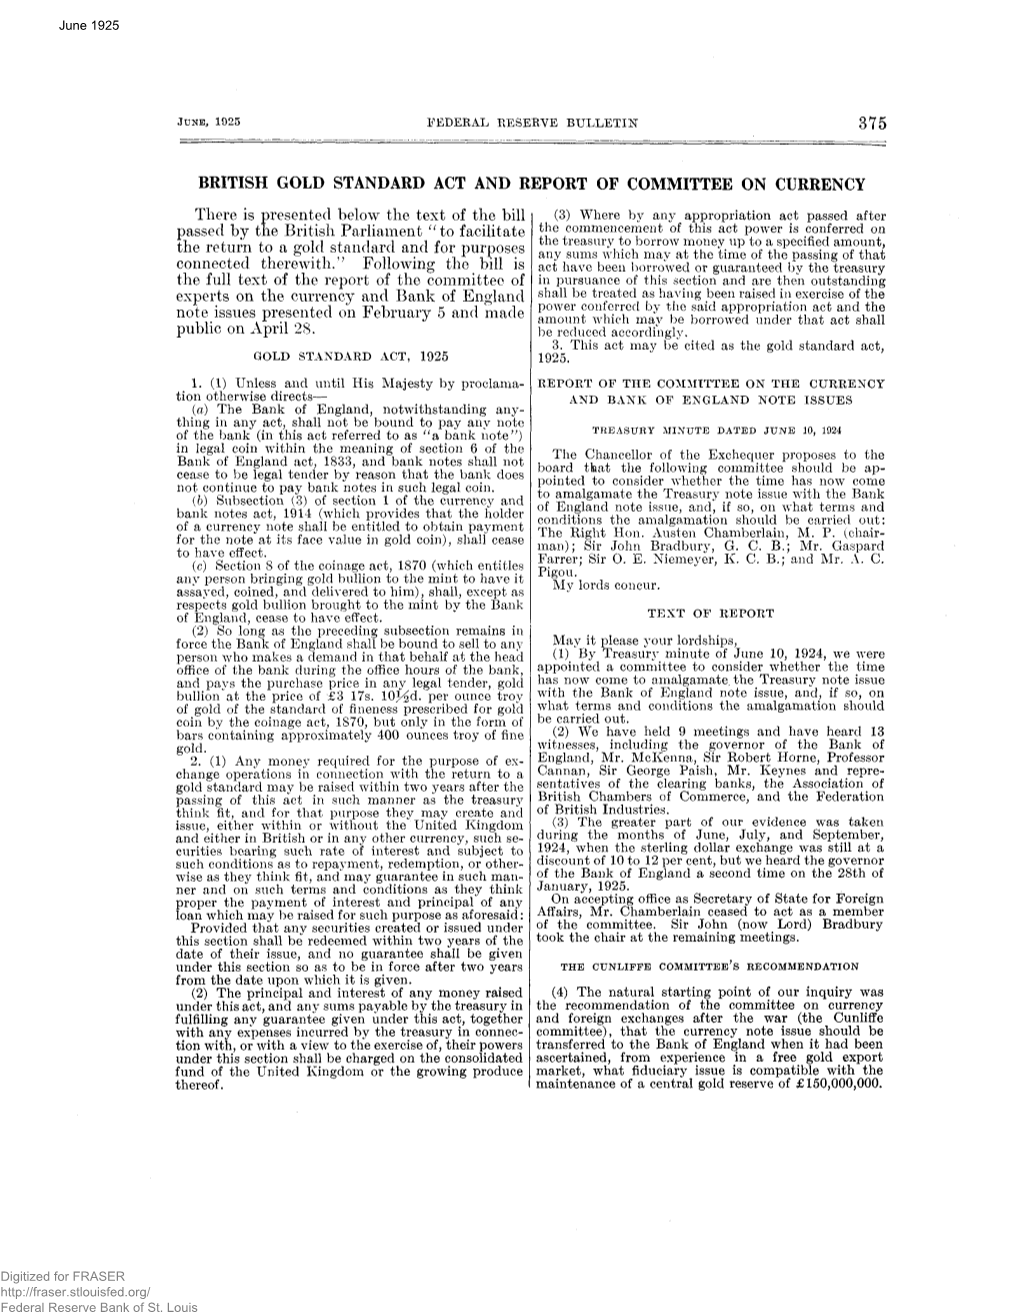 British Gold Standard Act and Report of Committee on Currency